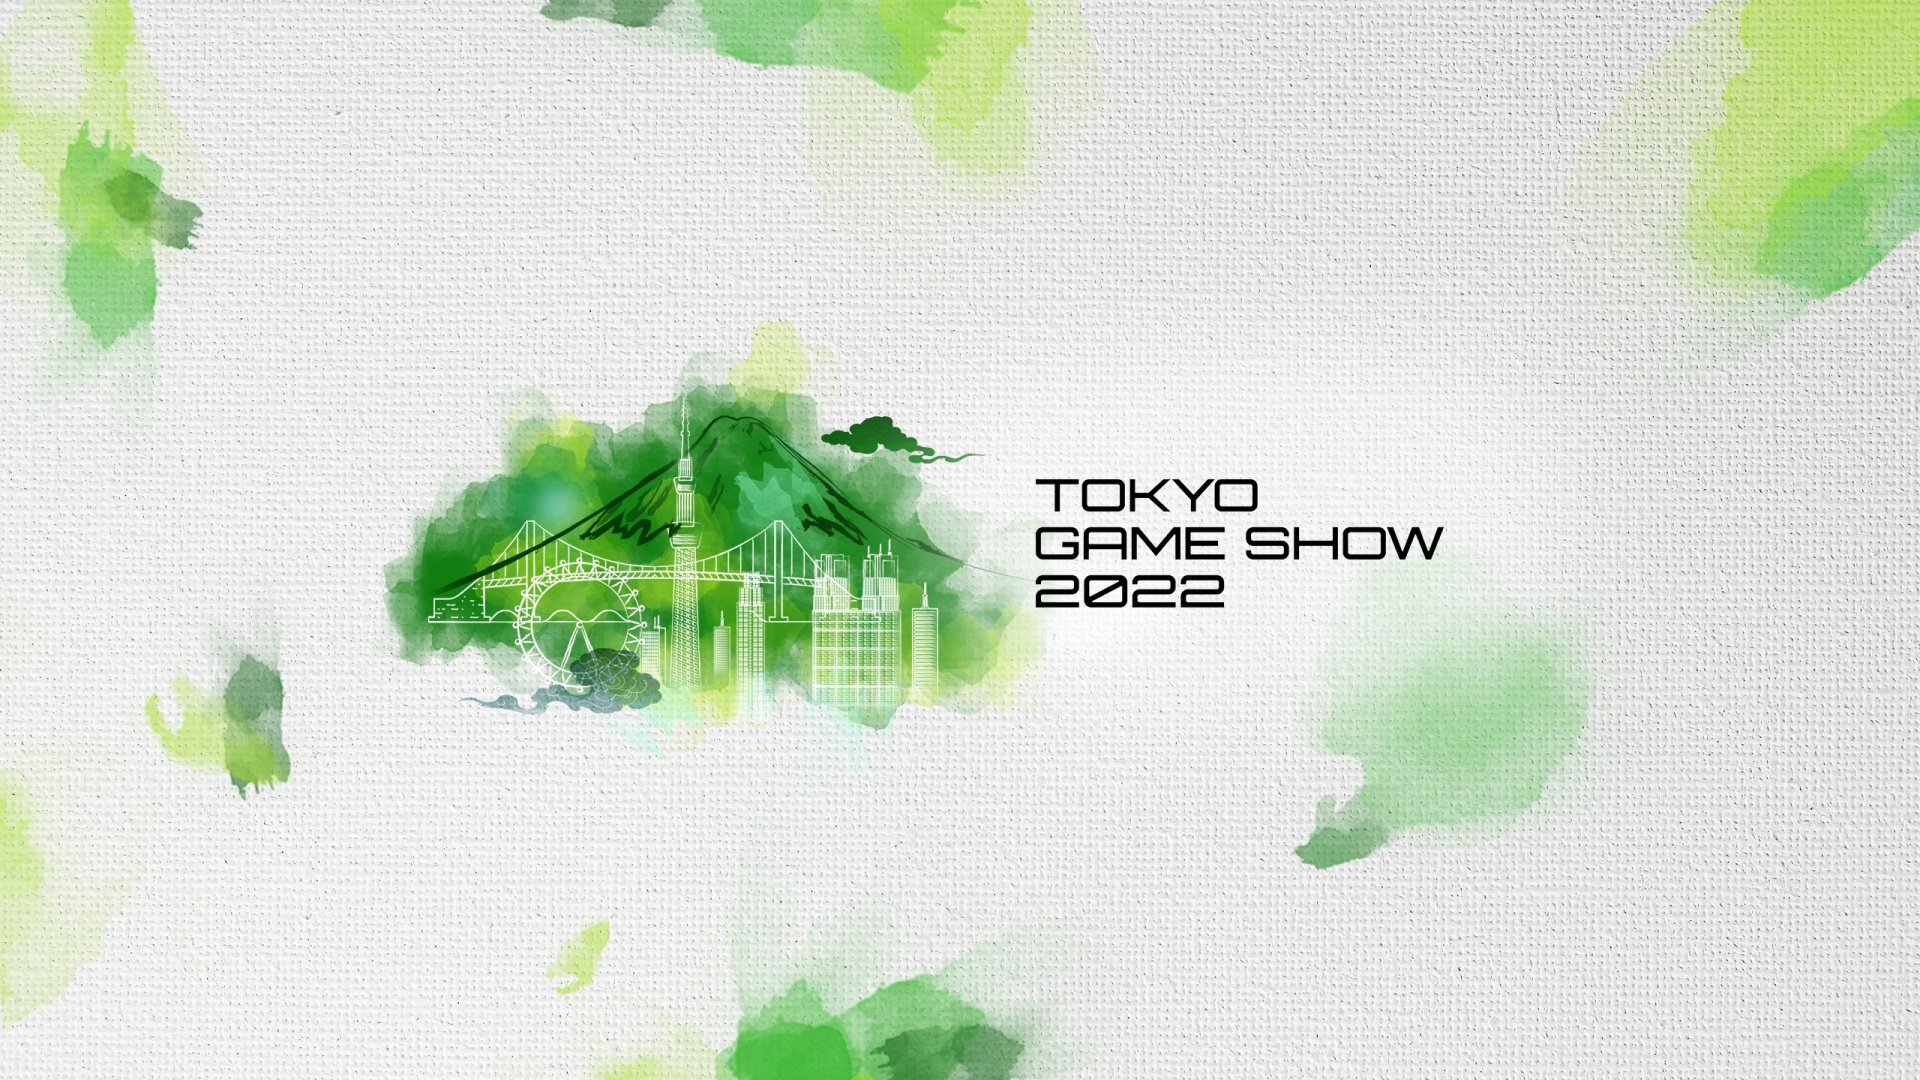 Video For Tokyo Game Show Xbox Stream 2022: News and Updates on 22 Games From Majority Japanese Developers, DEATHLOOP Coming to Xbox Next Week, and More